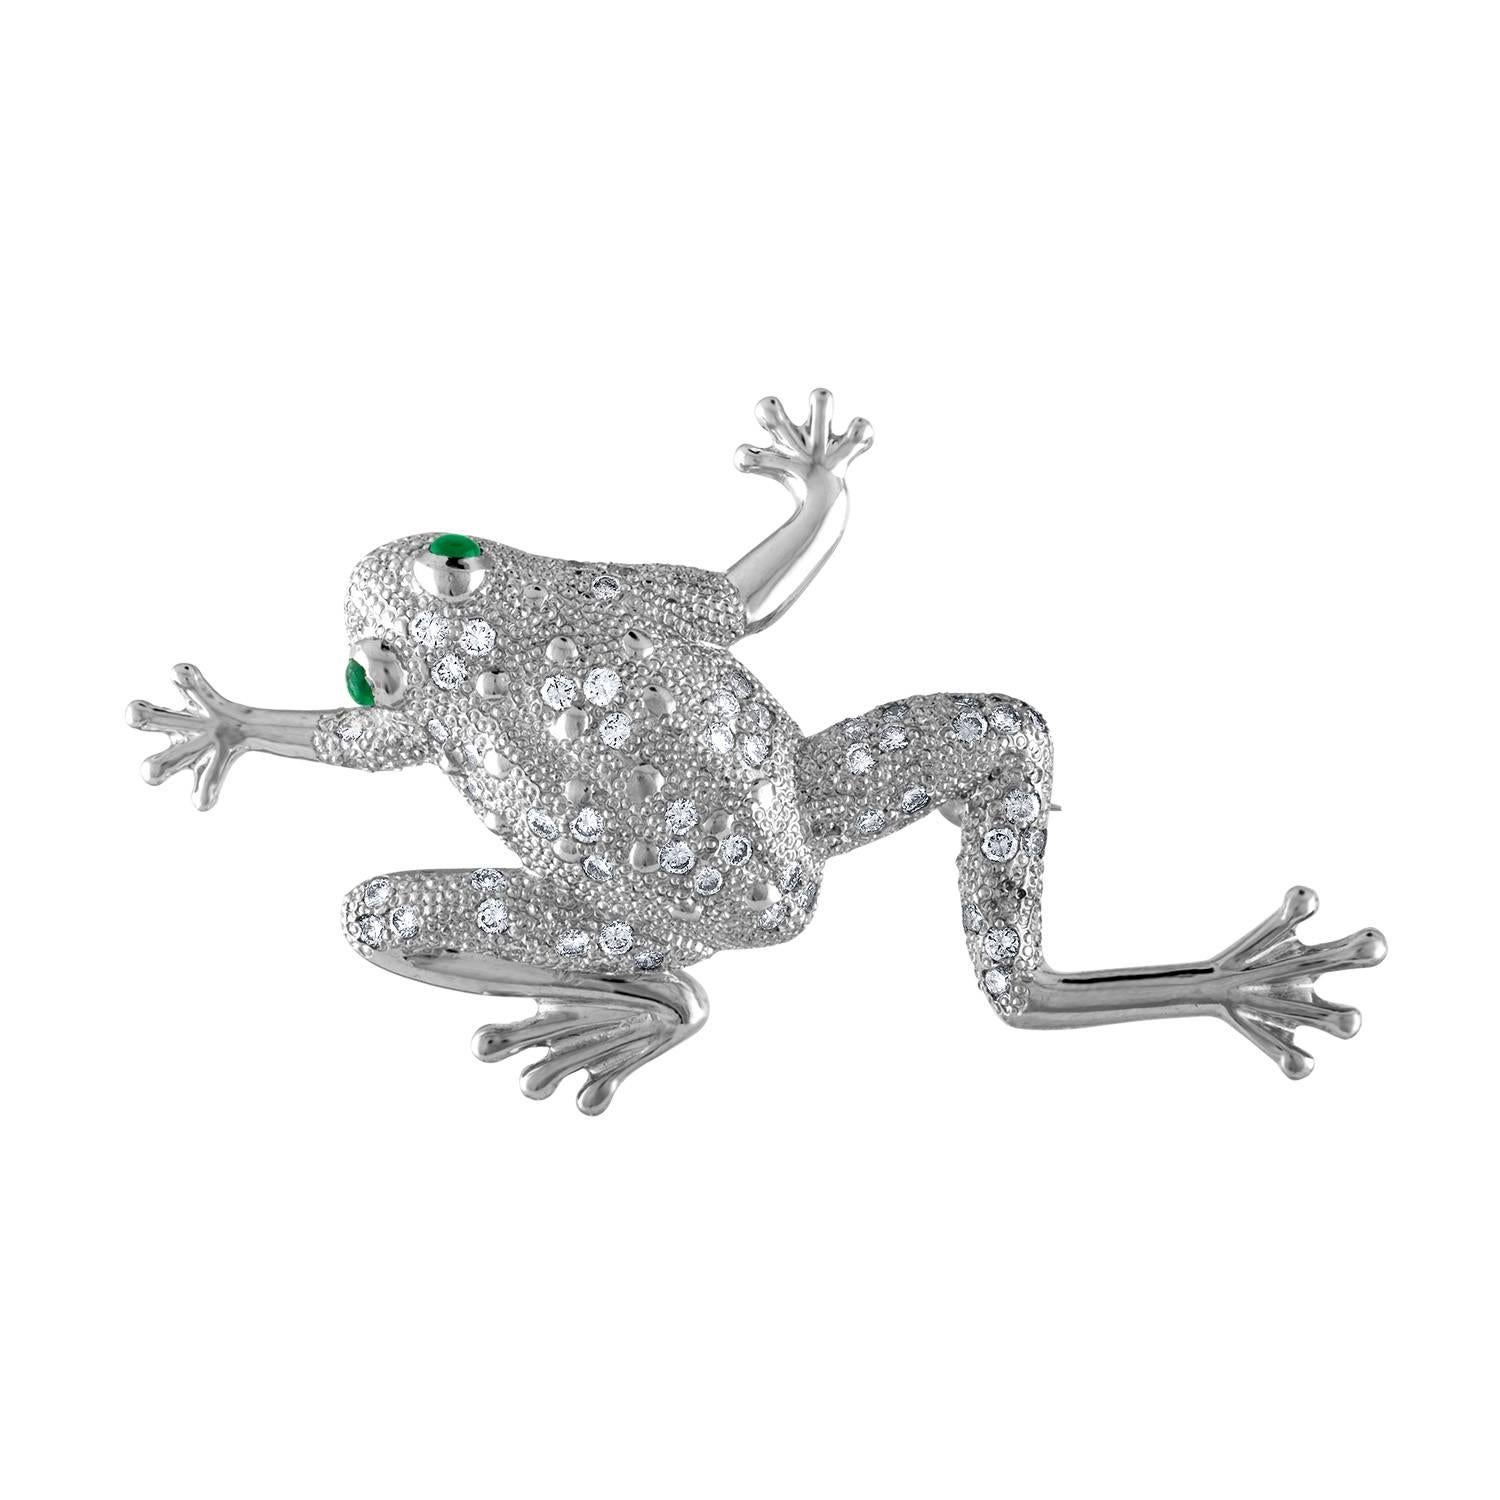 Platinum Frog Brooch with 1 Carat Diamond and .35 Carat of Emerald For Sale